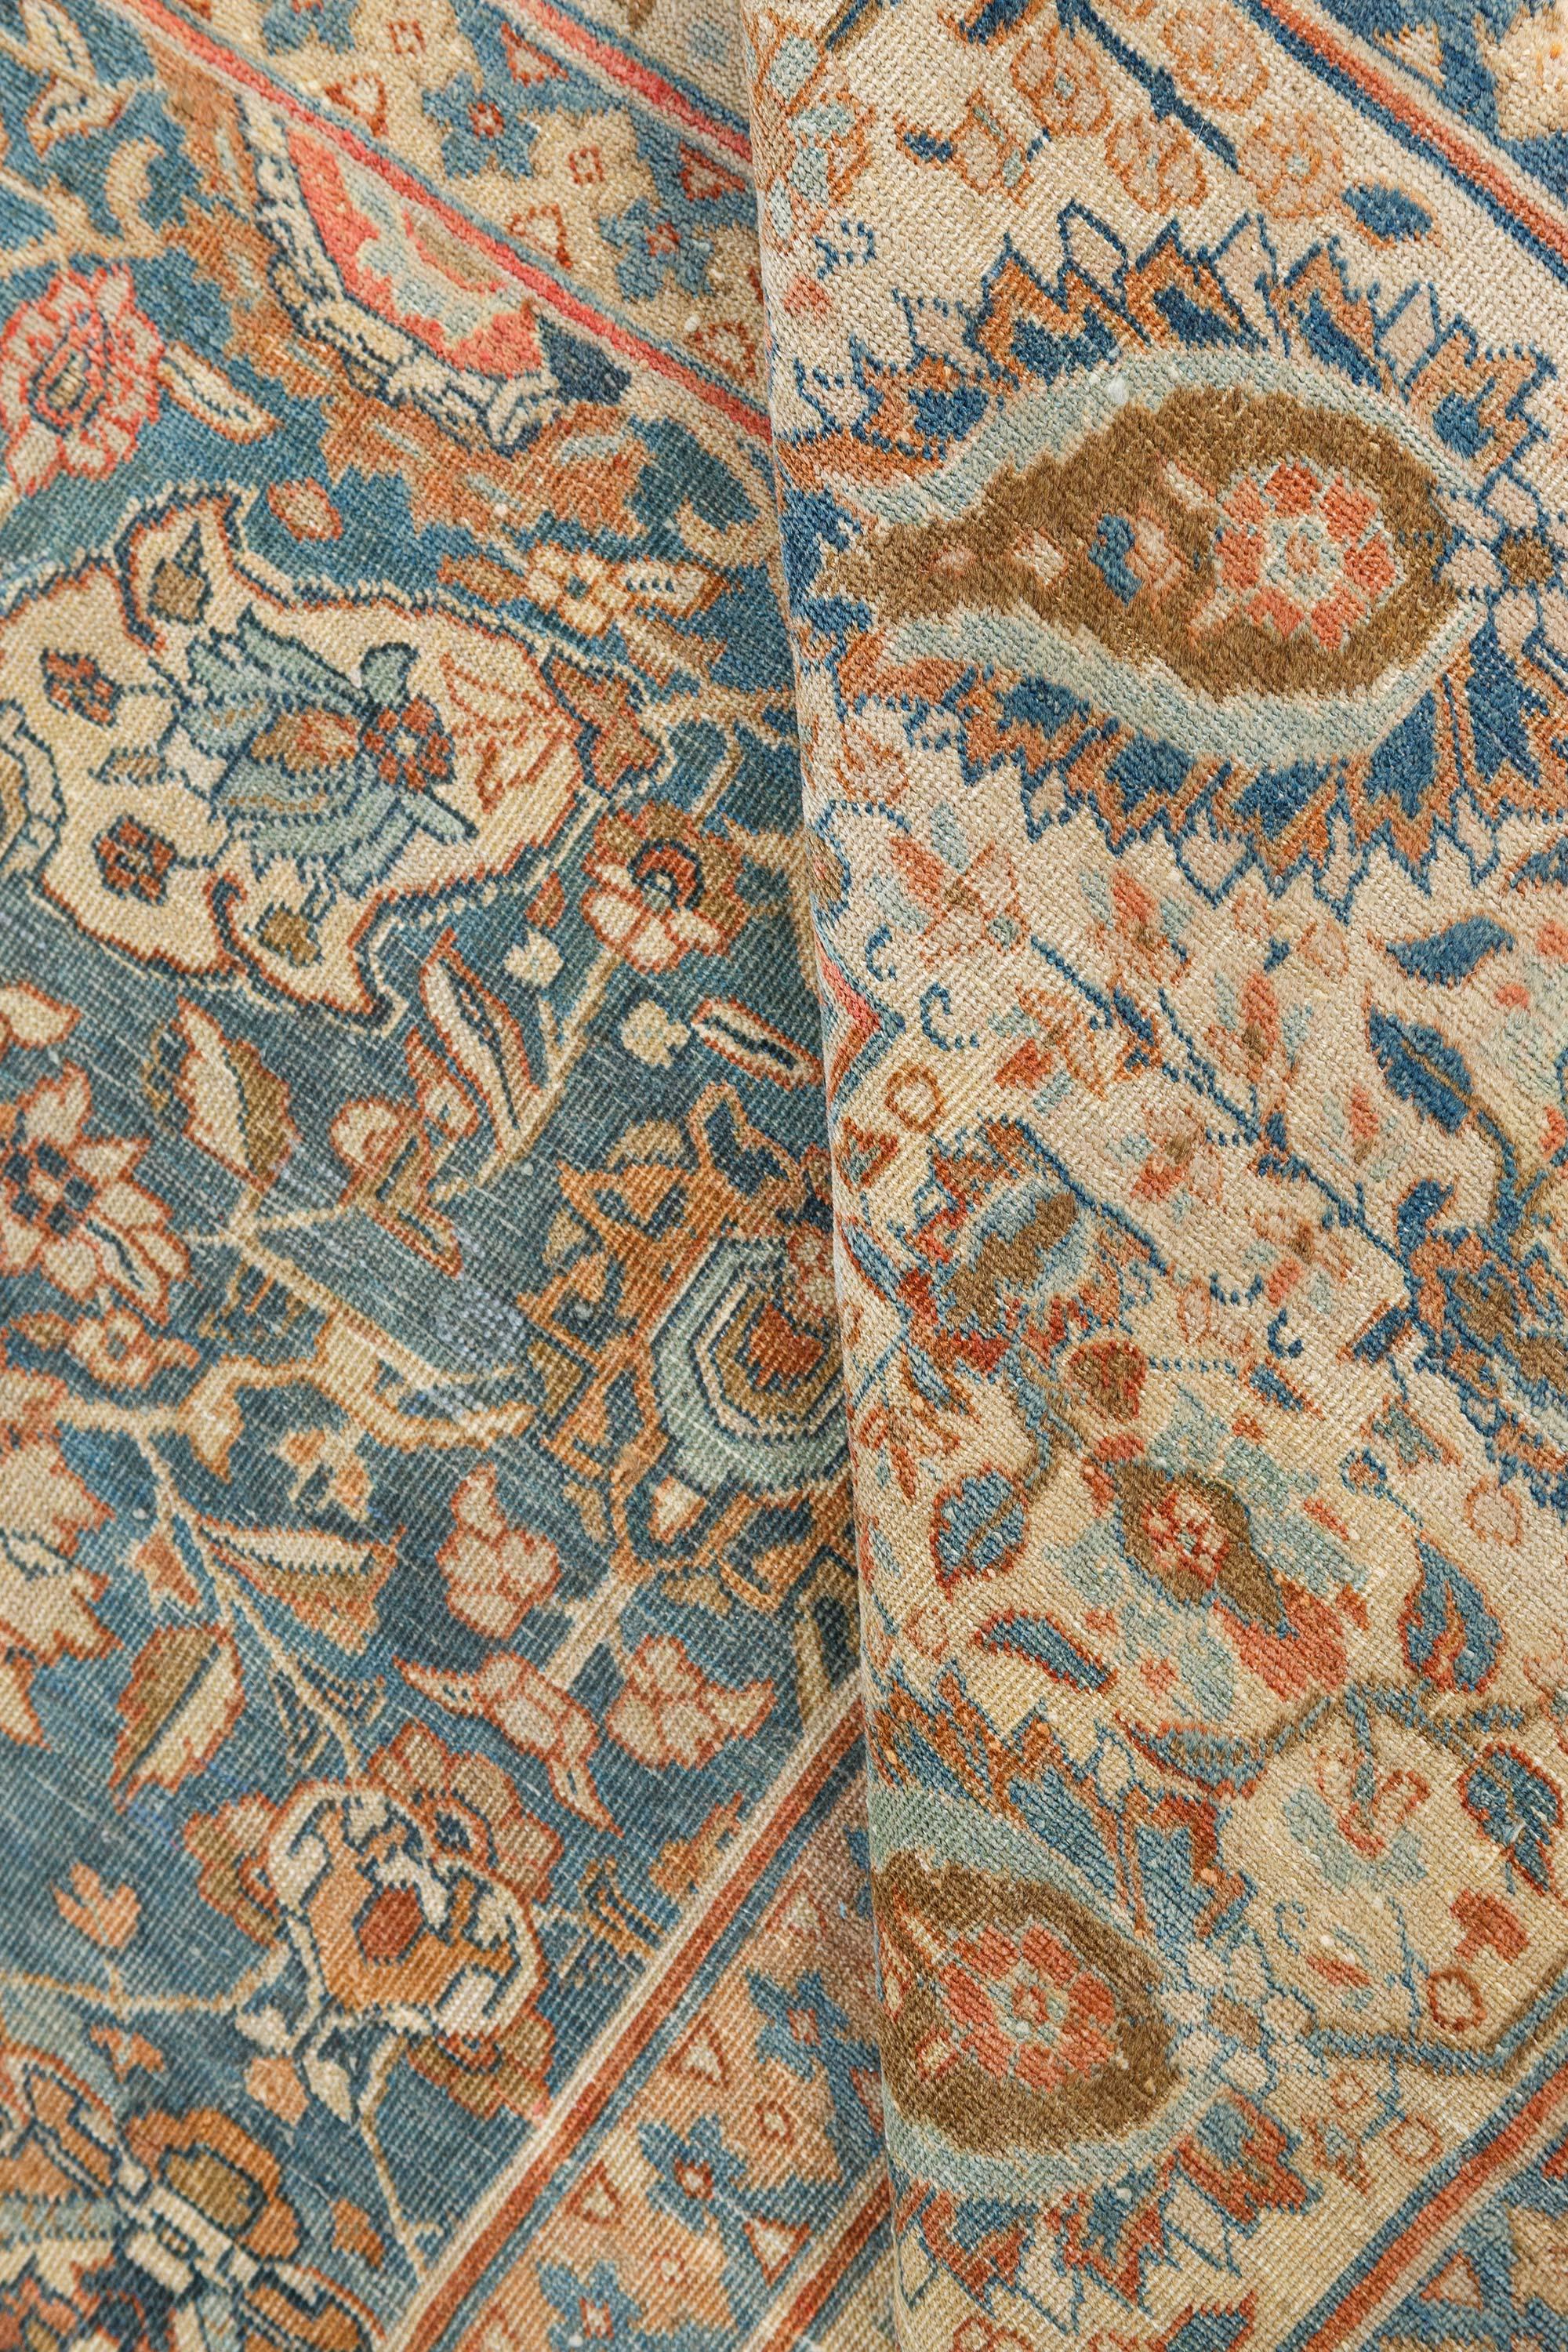 Antique Persian Tabriz rug in blue and brown
Size: 8'4